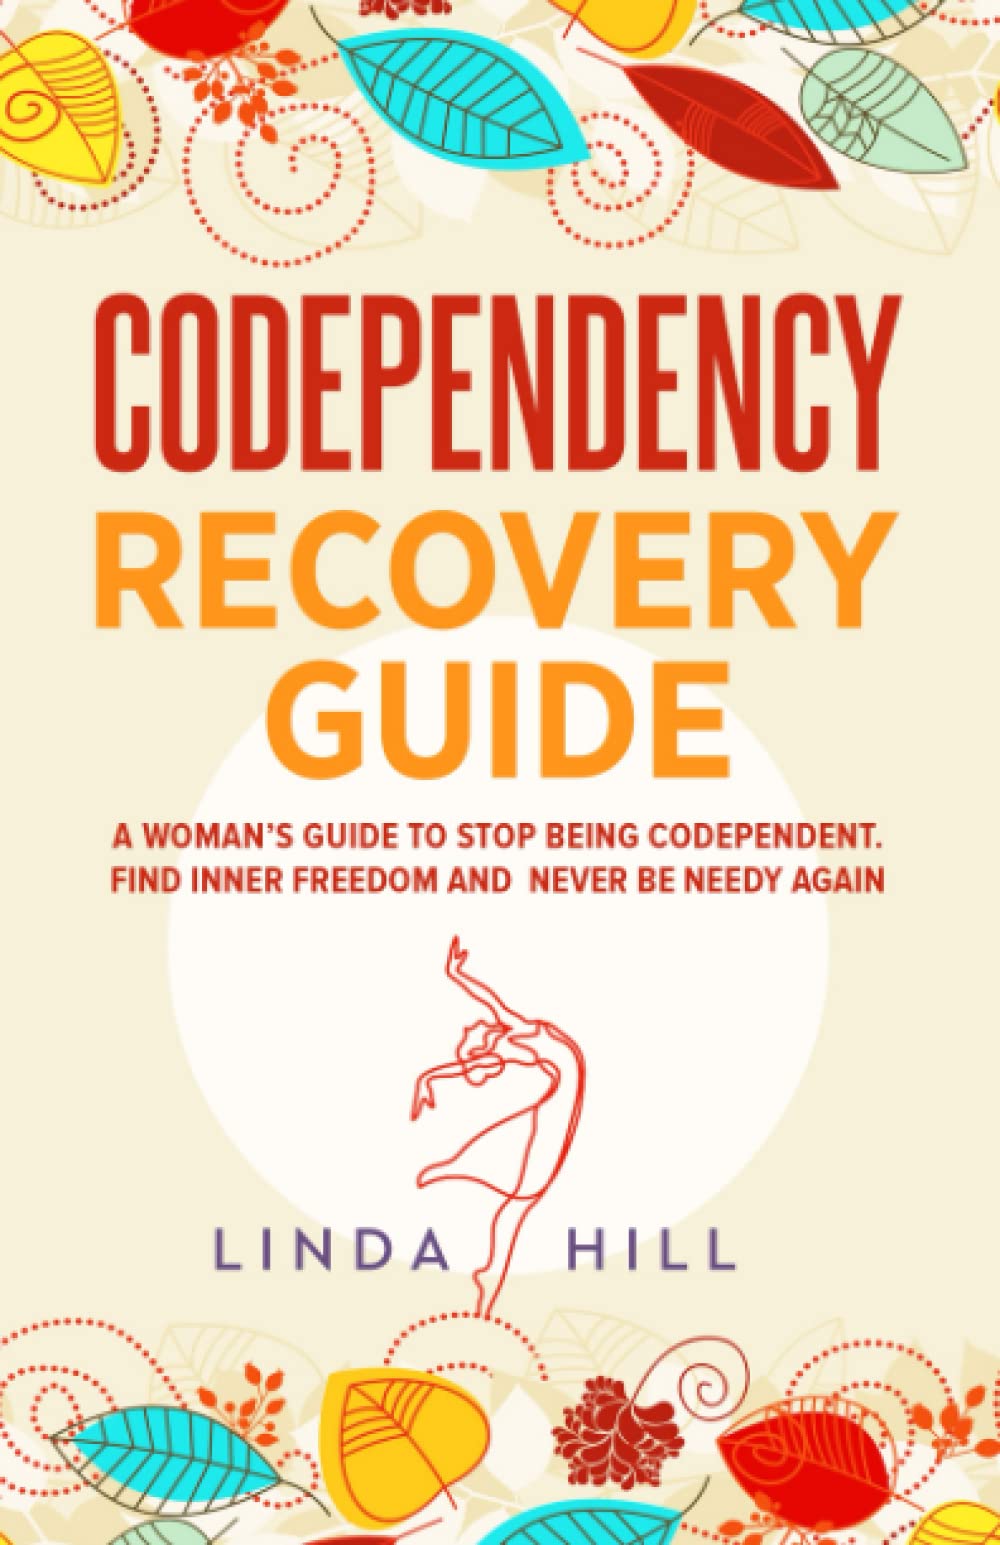 Codependency Recovery Guide: A Woman’s Guide to Stop Being Codependent. Find Inner Freedom and Never Be Needy Again (Break Free and Recover from Unhealthy Relationships)